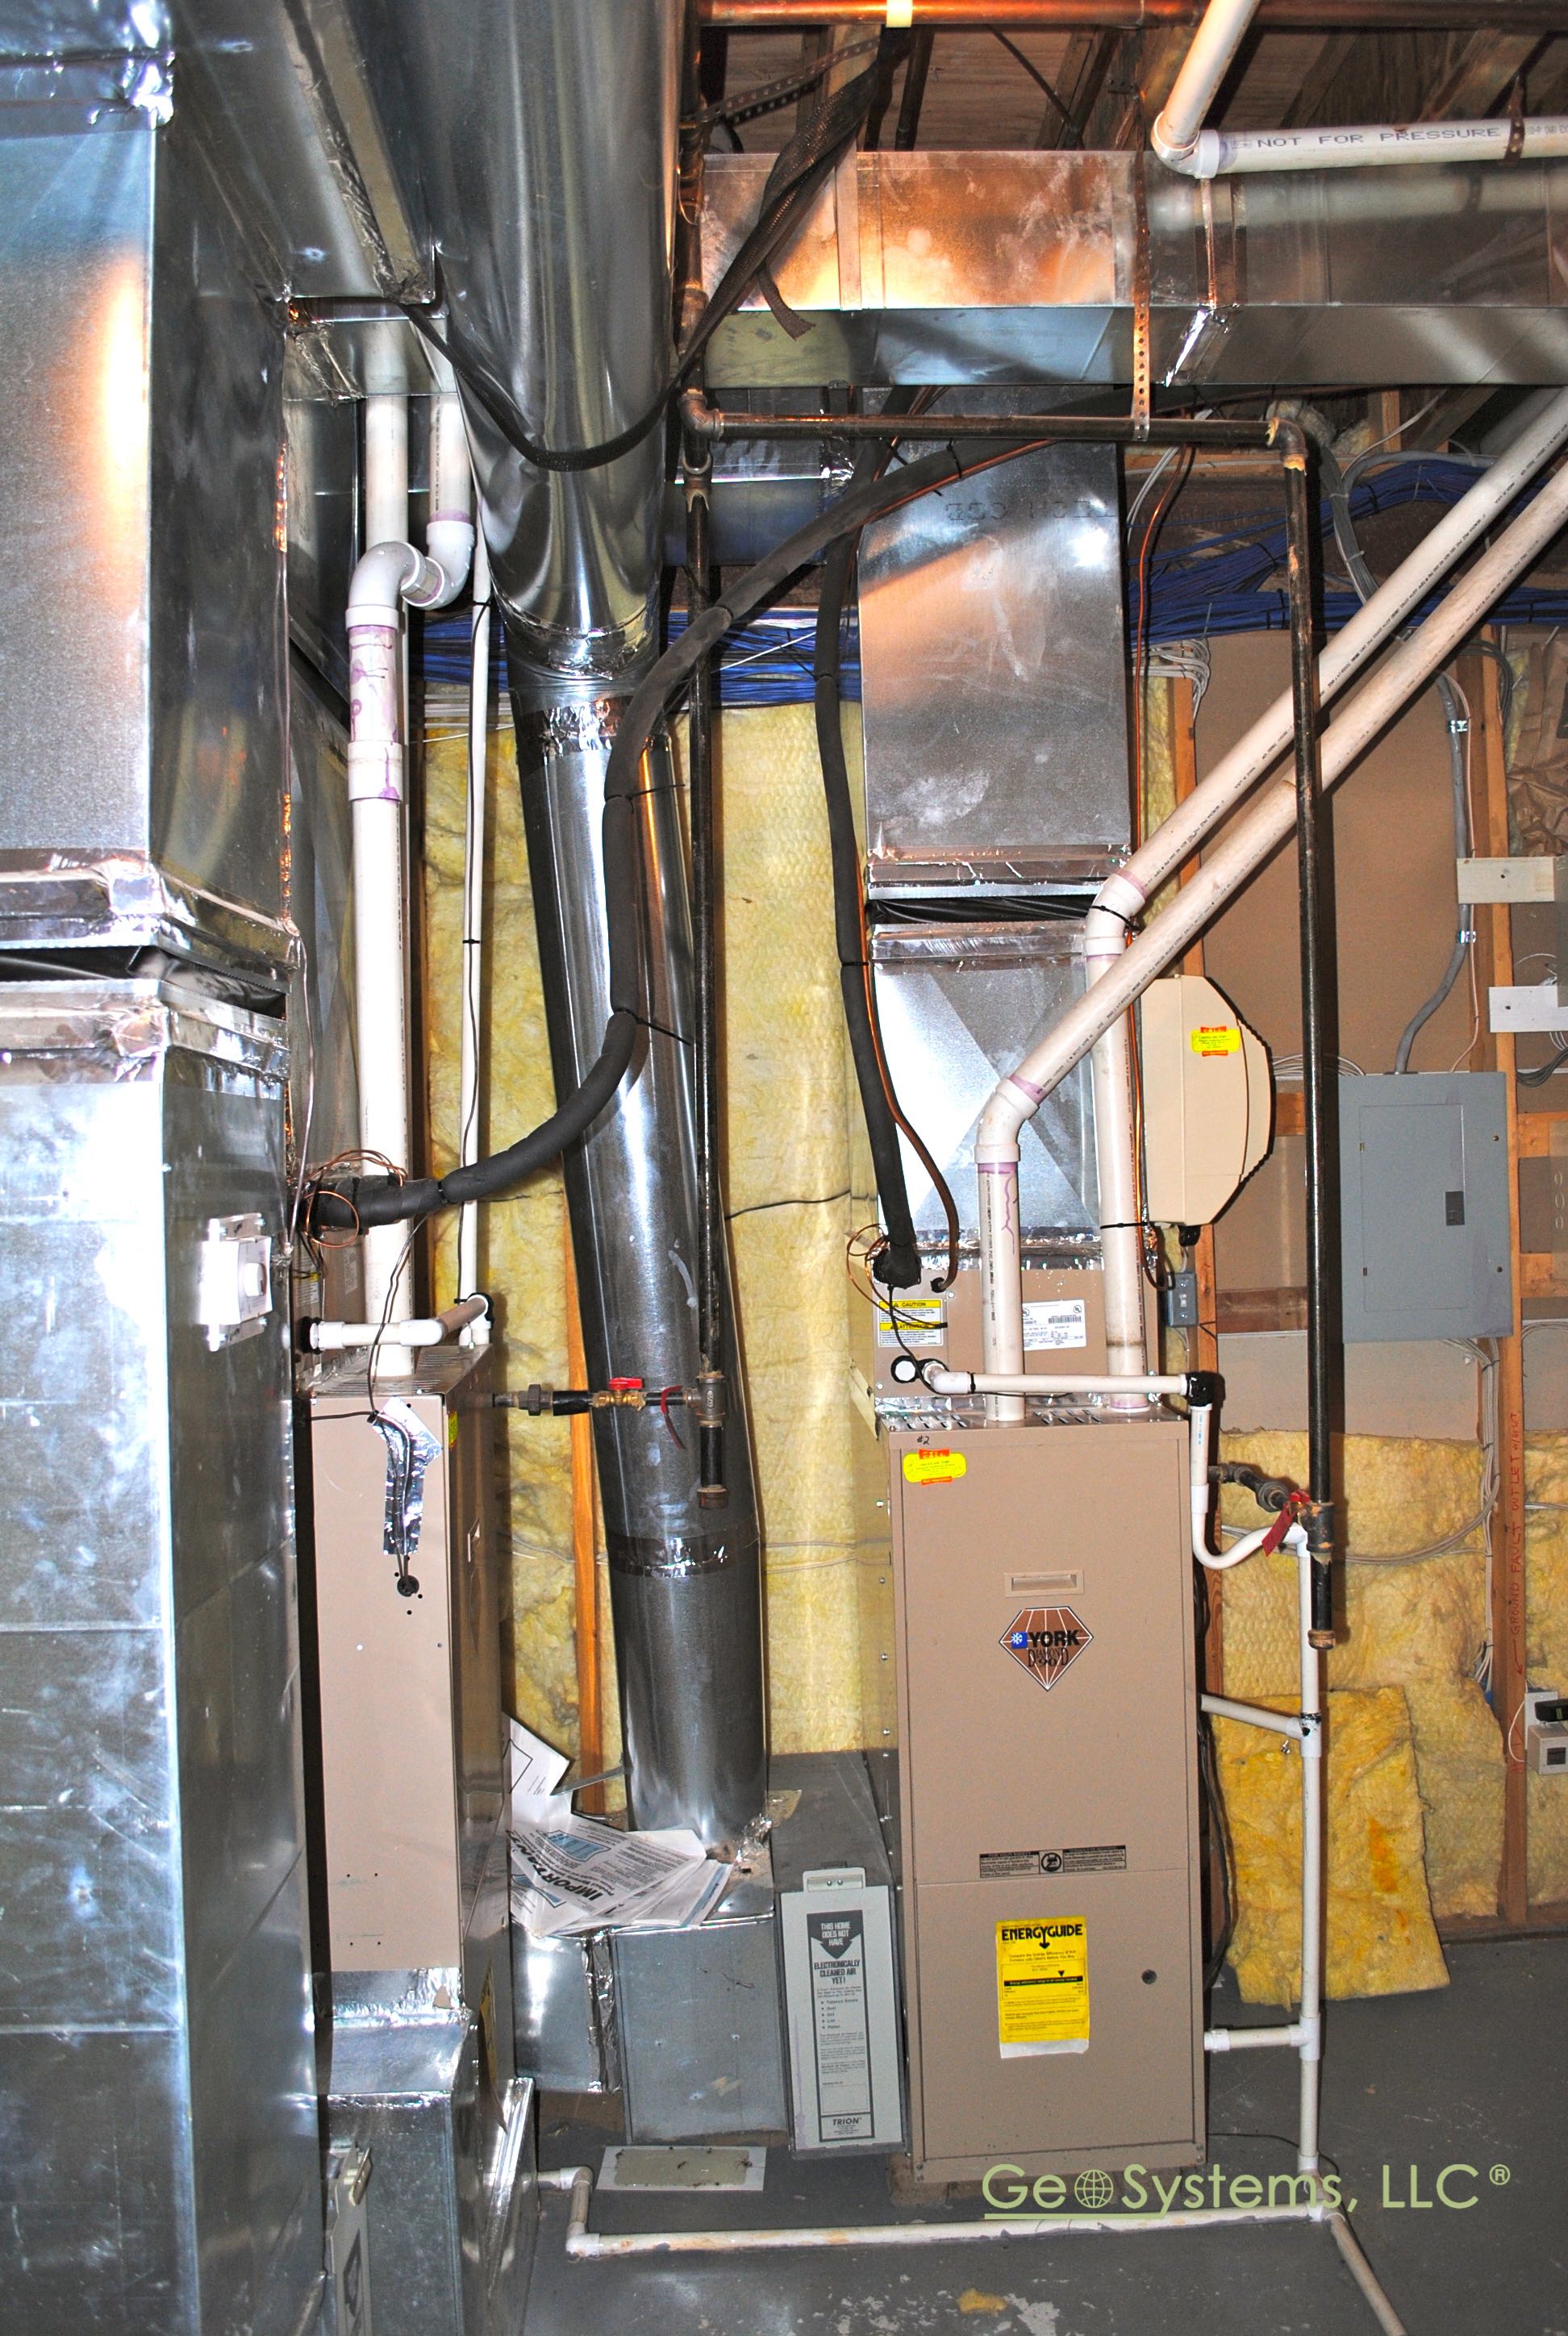 Geothermal Heat Pumps Are For Efficient